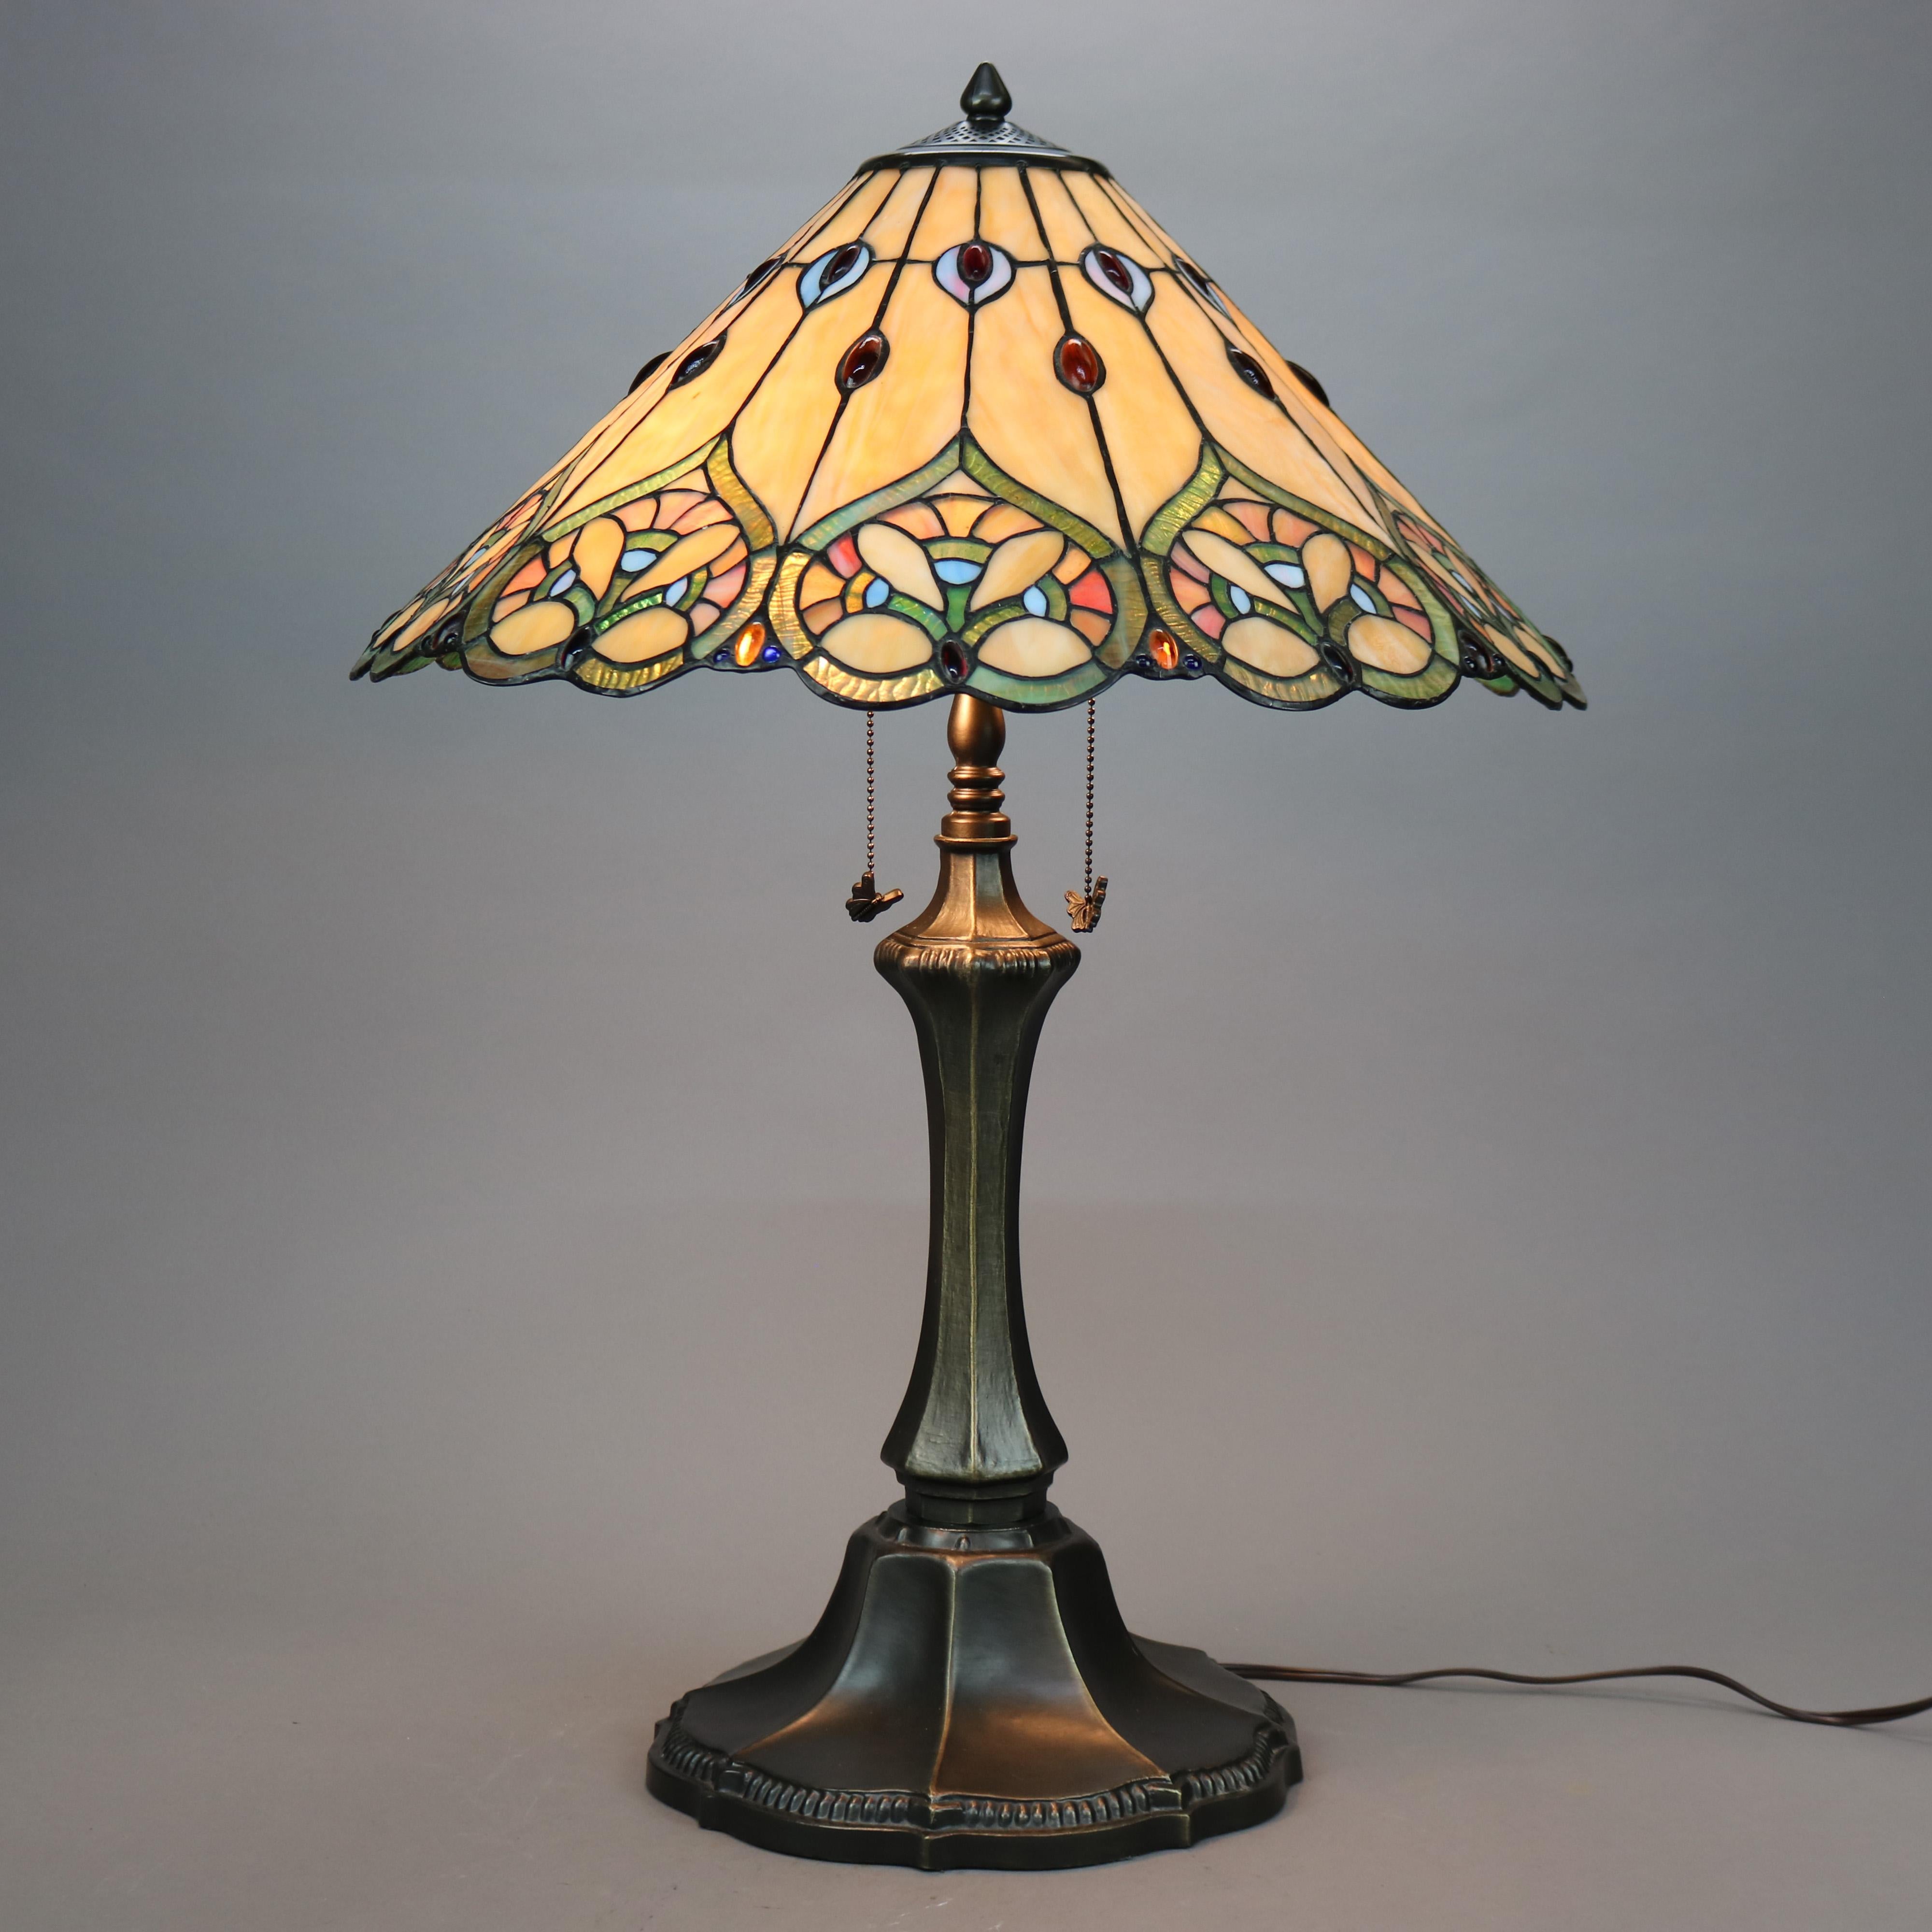 A Tiffany style table lamp offers a leaded stained glass conical shade having stylized floral design over double socket bronzed metal base, 20th century

Measures - 29.25''H x 21''W x 21''D.

Catalogue Note: Ask about DISCOUNTED DELIVERY RATES